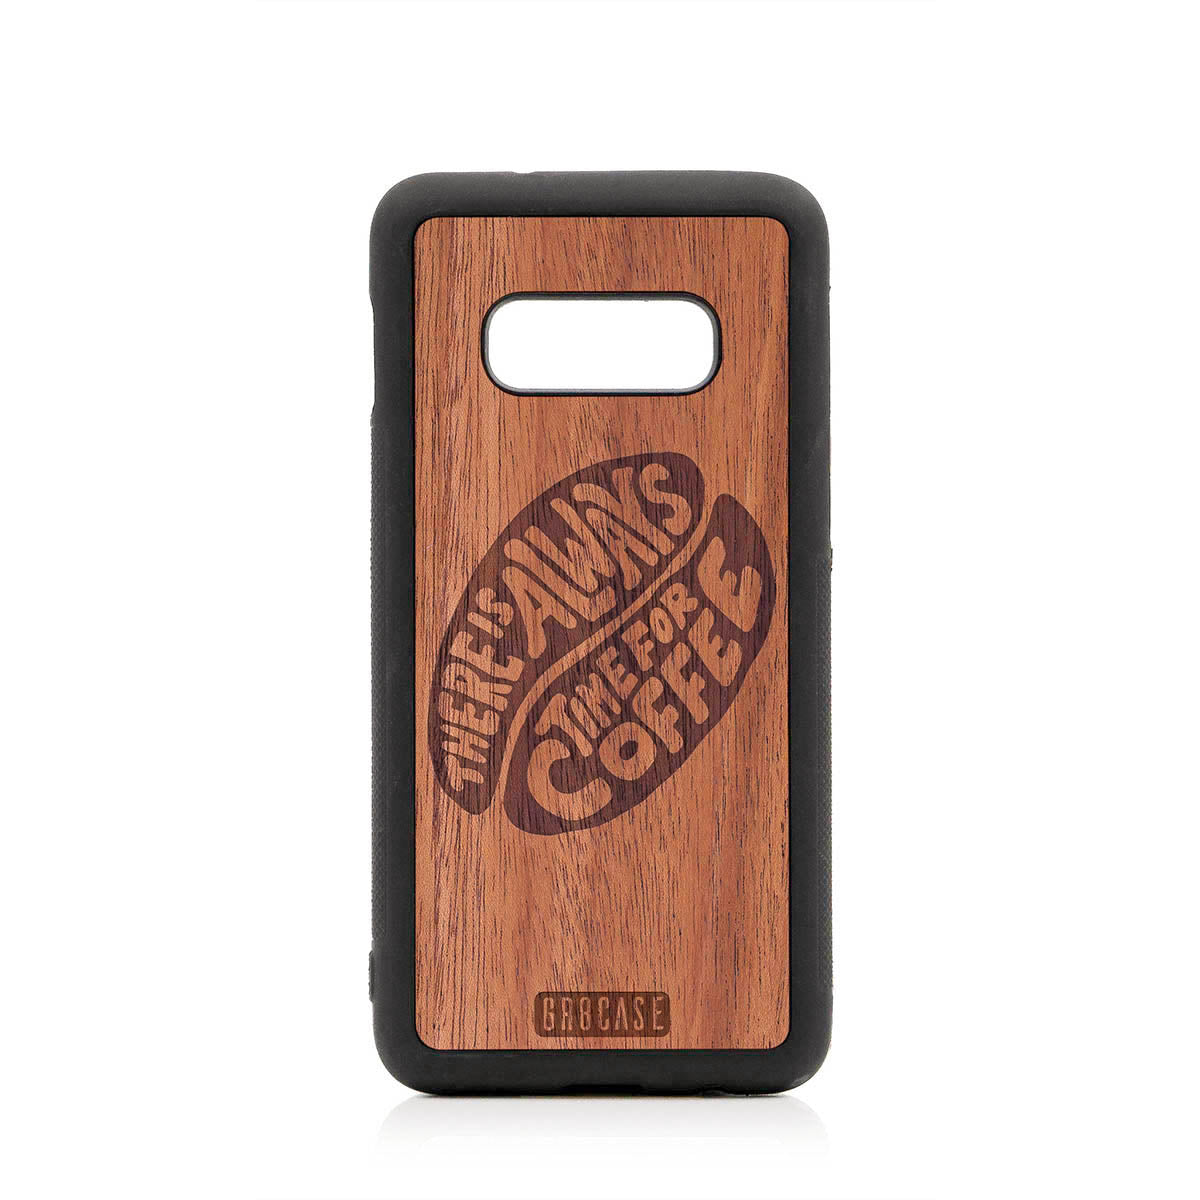 There Is Always Time For Coffee Design Wood Case For Samsung Galaxy S10E